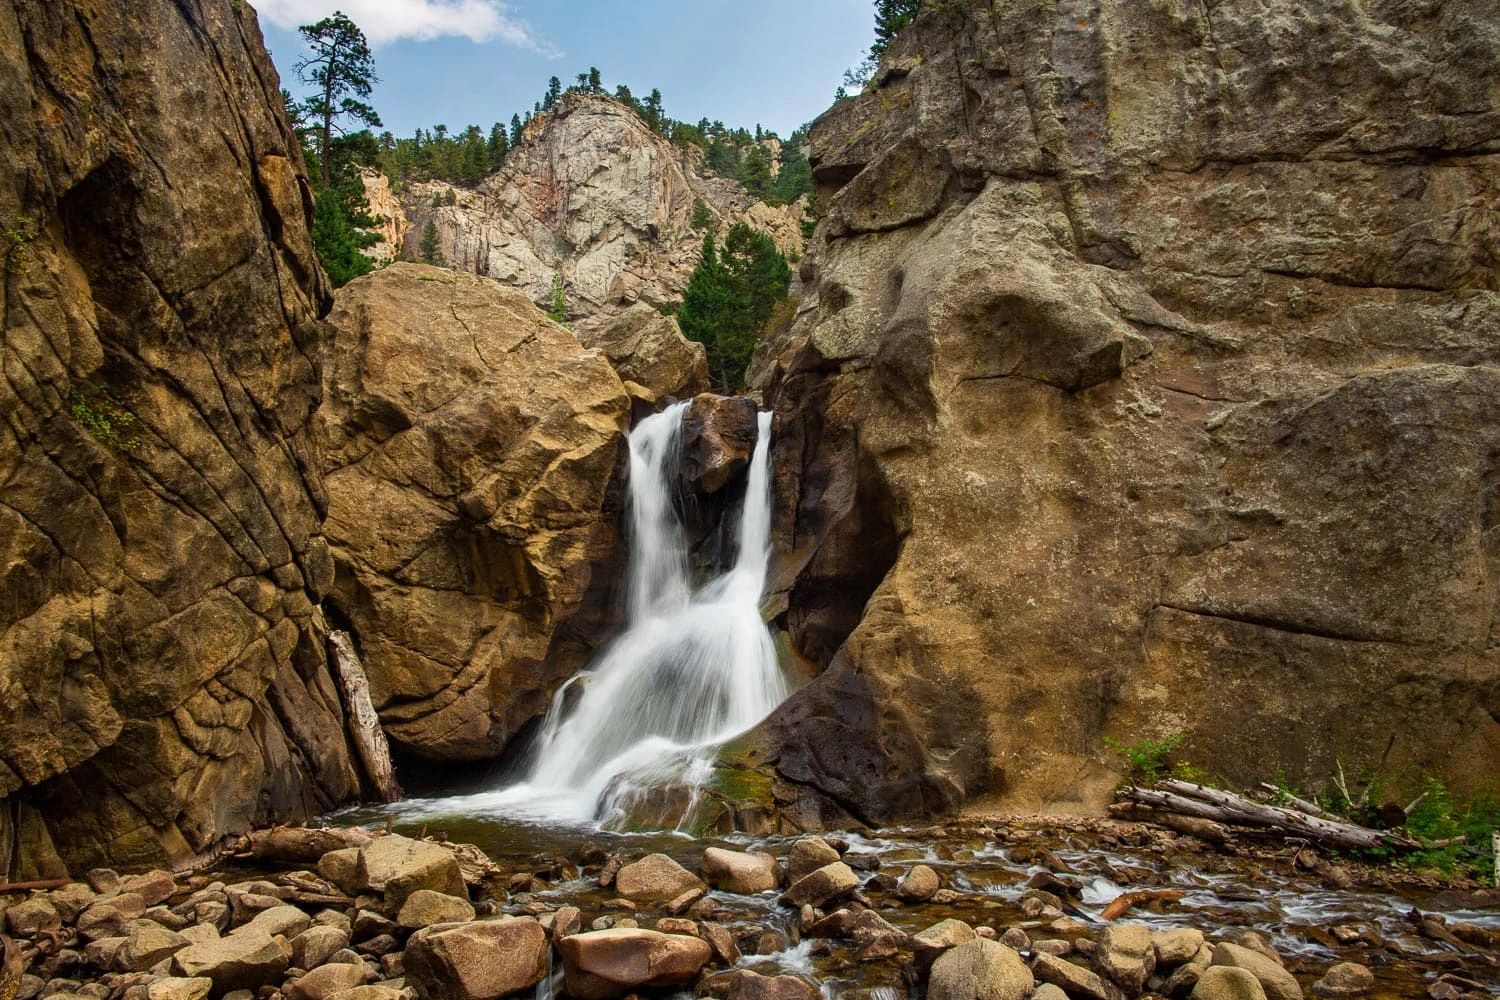 Boulder falls is a large waterfall location carved into rock.